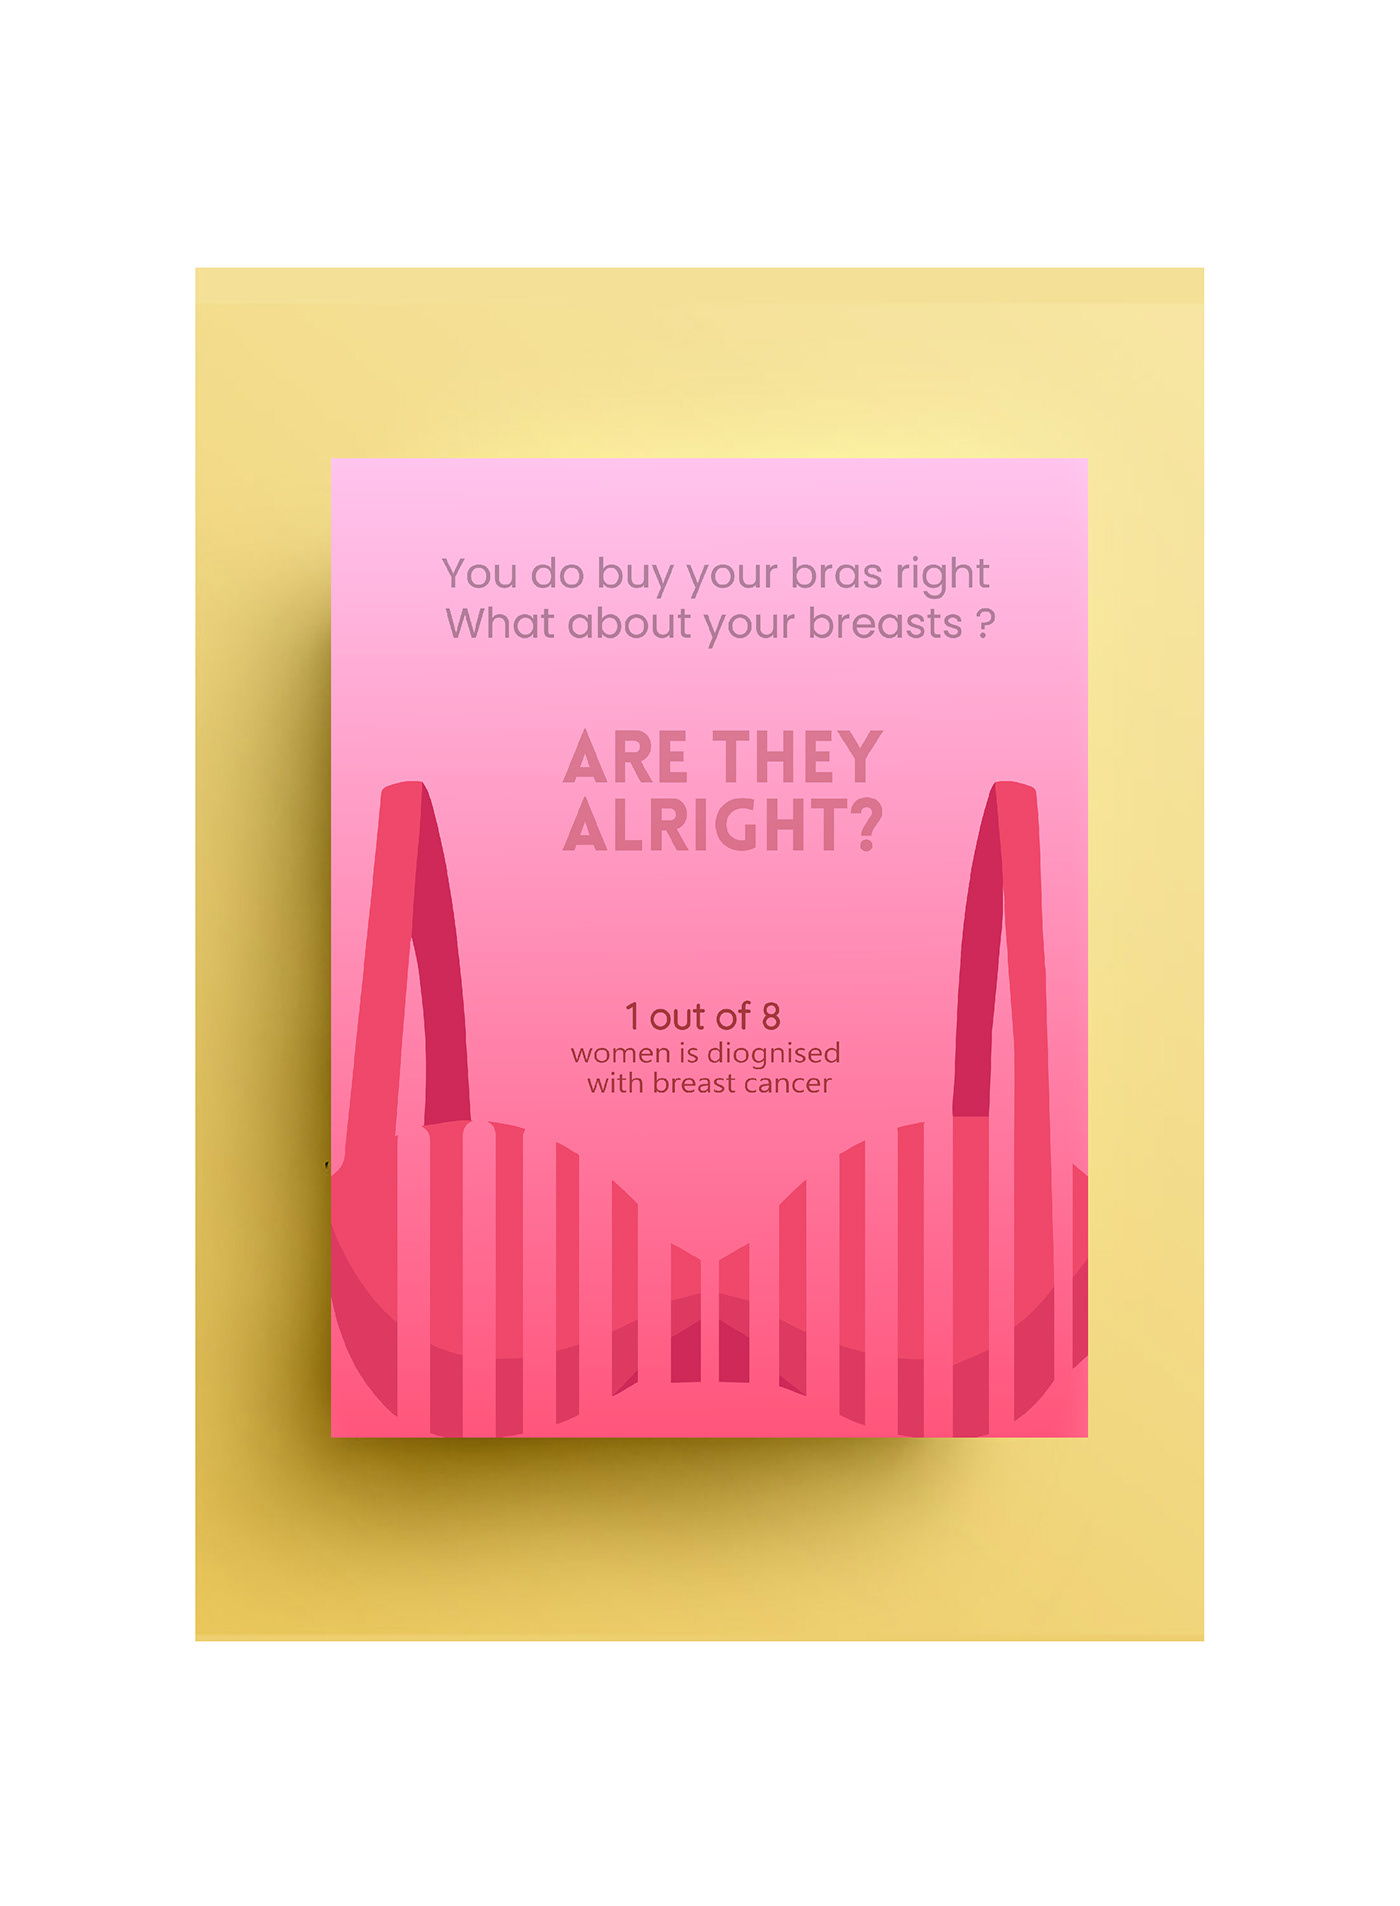 social issue breast cancer cancer awareness Illustrator photoshop campaign poster